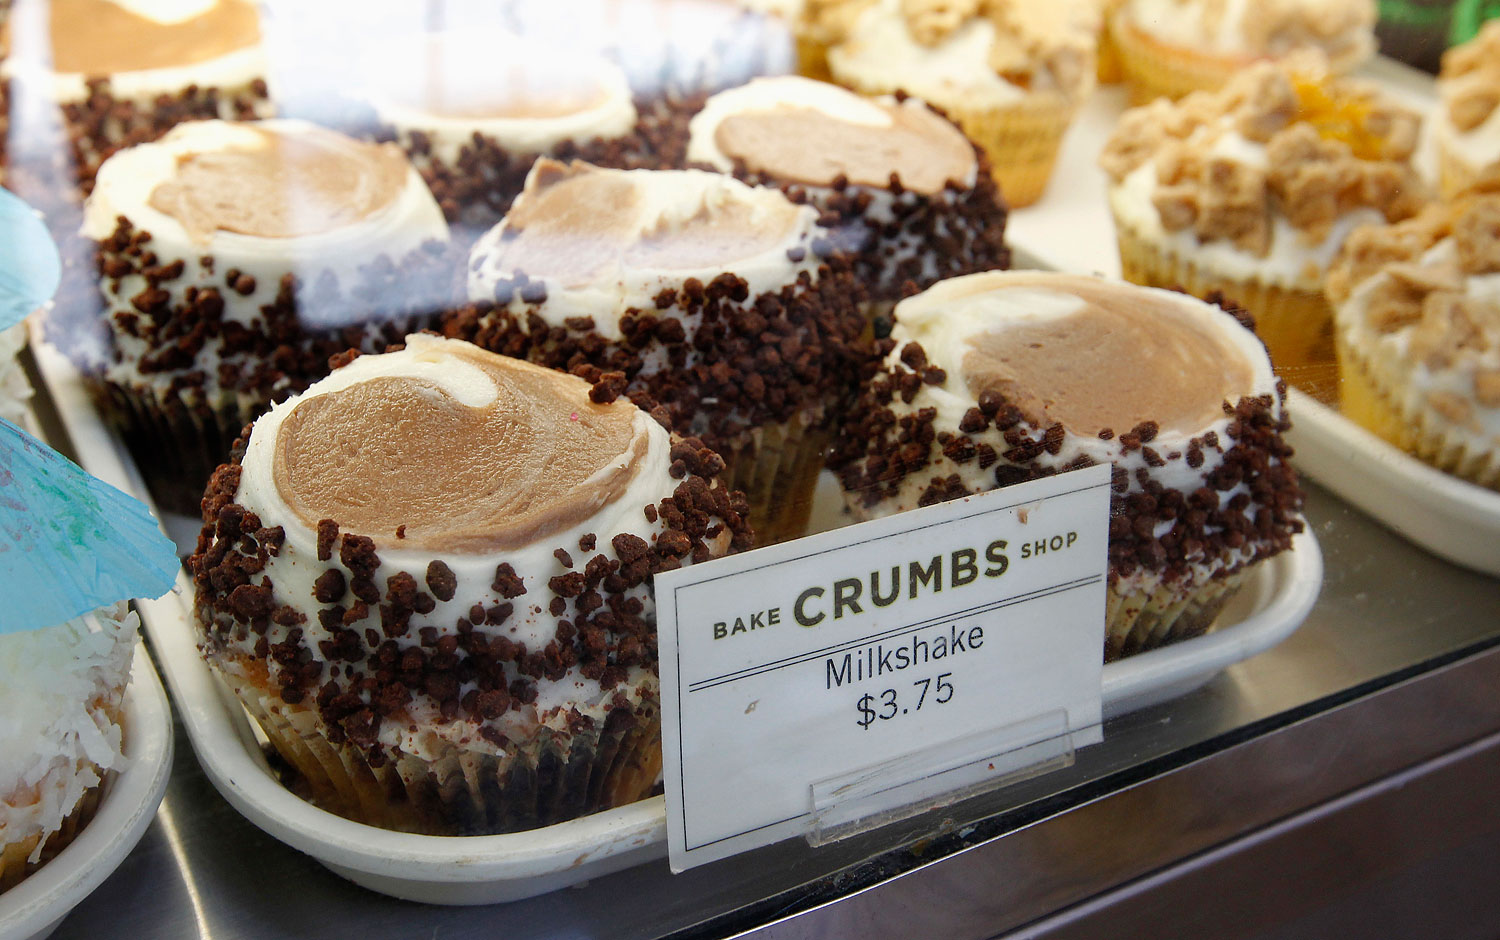 A tray of cupcakes is pictured at a Crumbs Bake Shop in Hollywood, June 29, 2011. (Fred Prouser—Reuters)